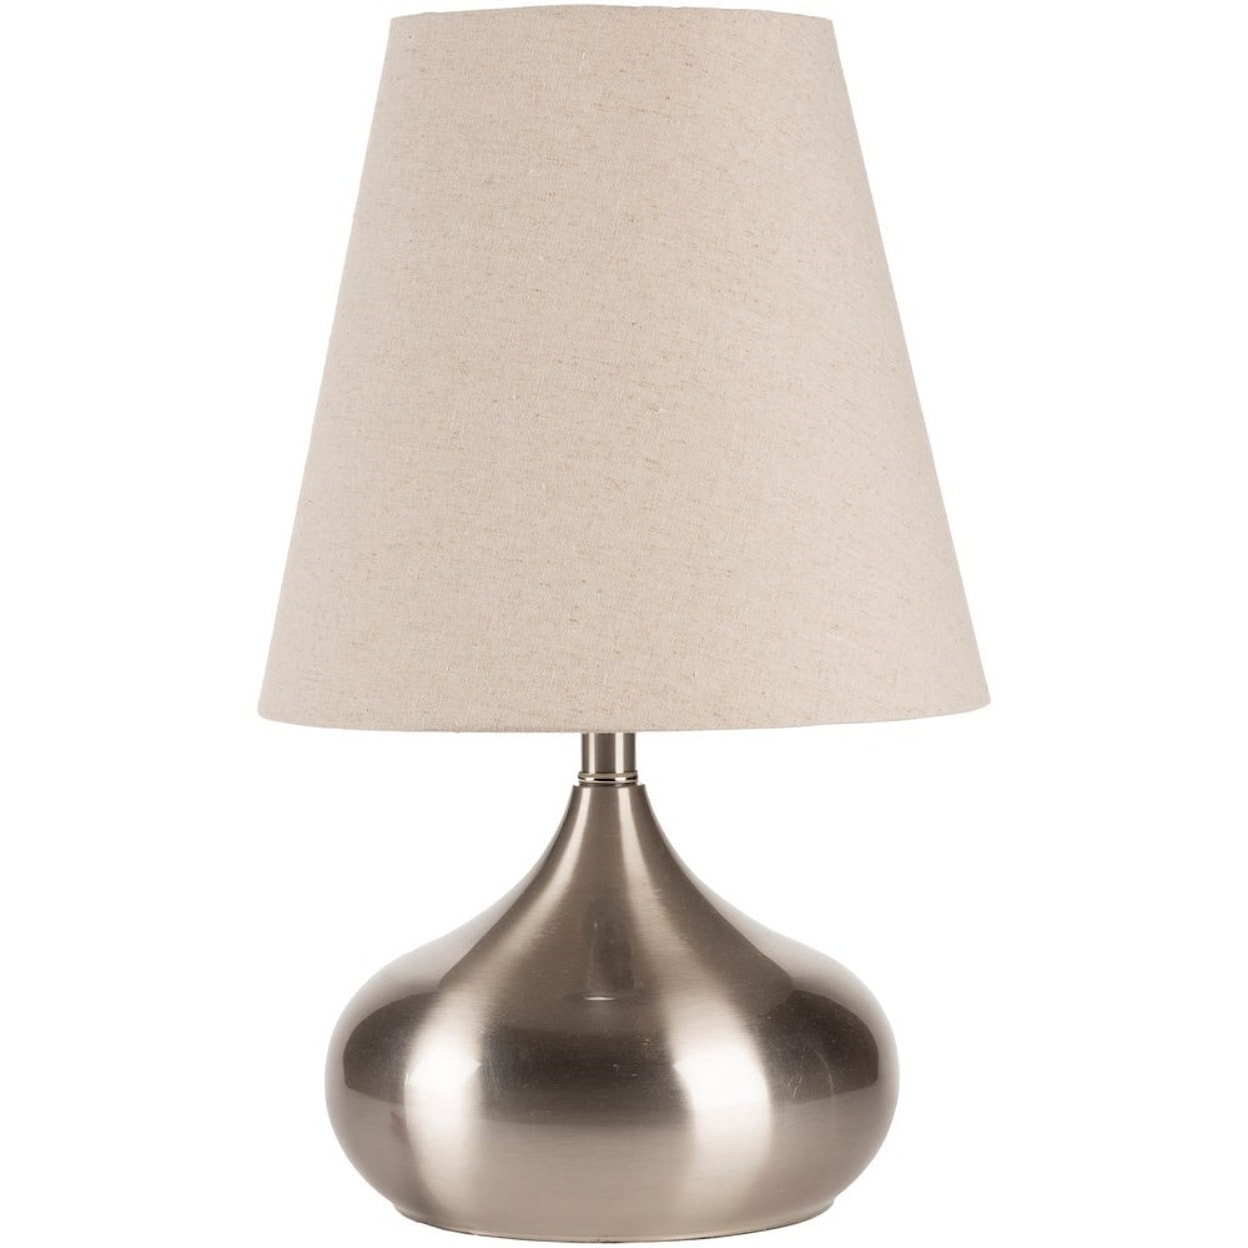 Surya Valerie Brushed Steel Contemporary Table Lamp